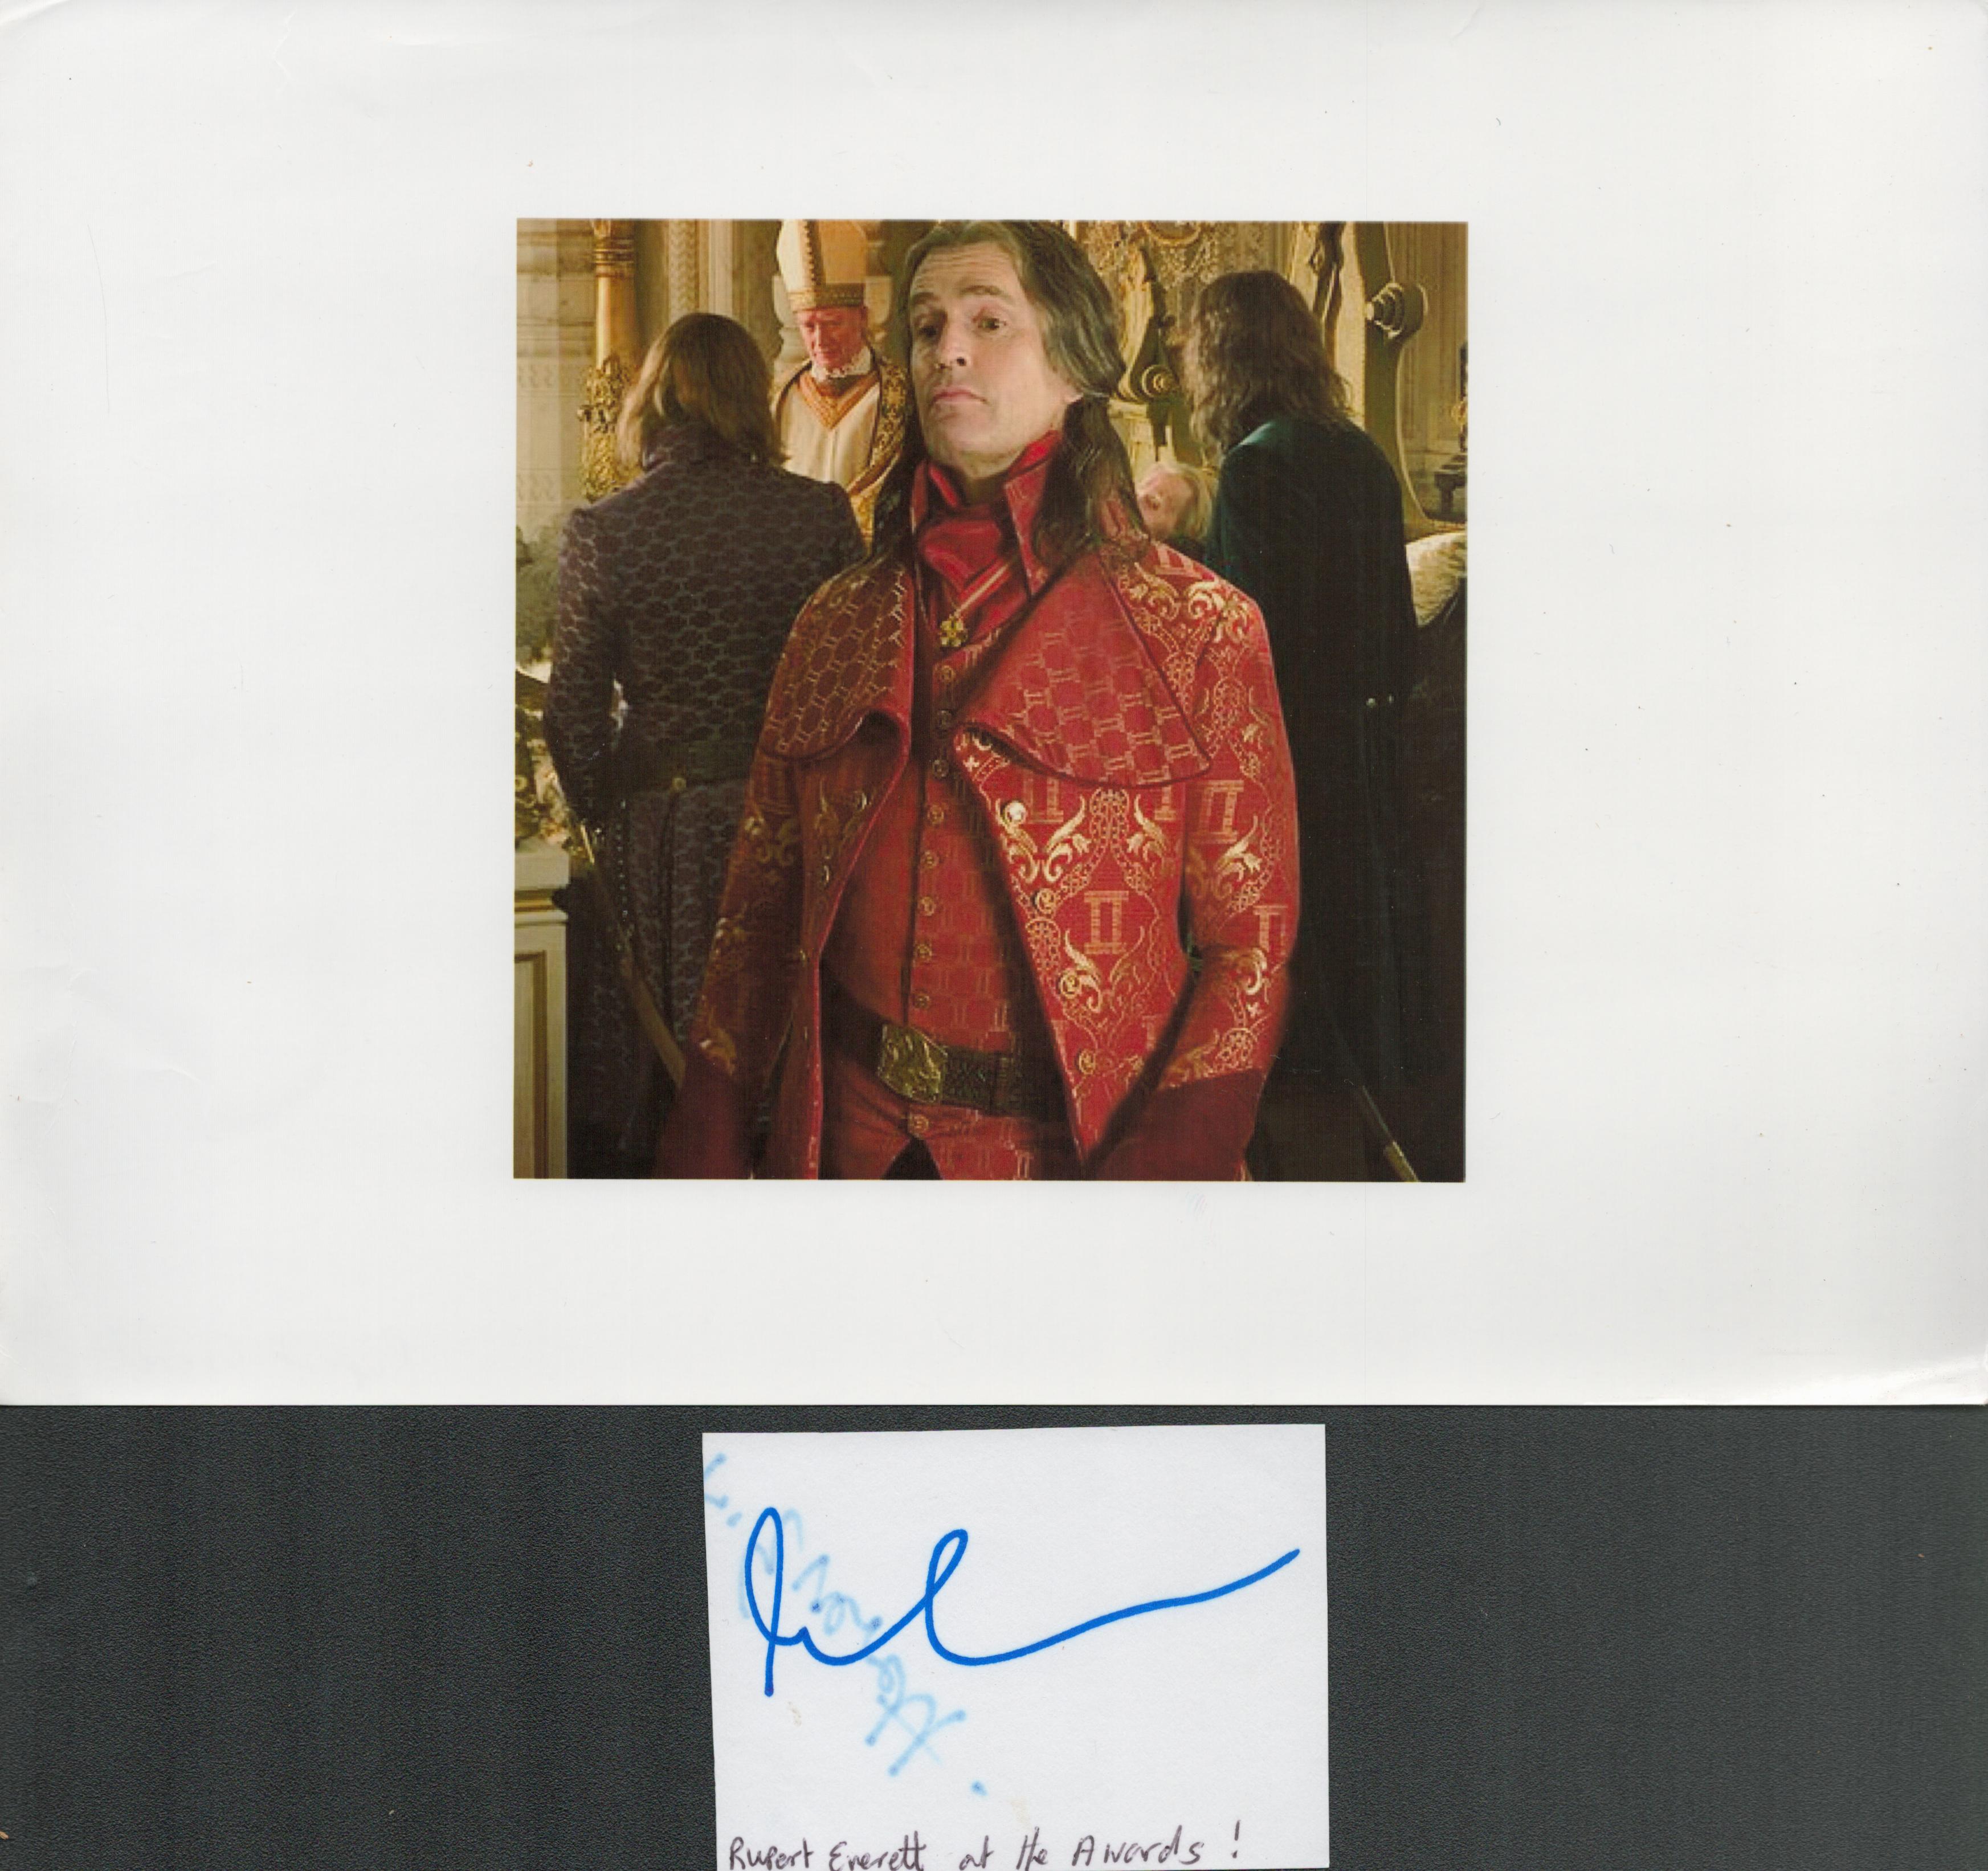 Rupert Everett signature piece featuring a signed white card and a colour photograph. This 12x8